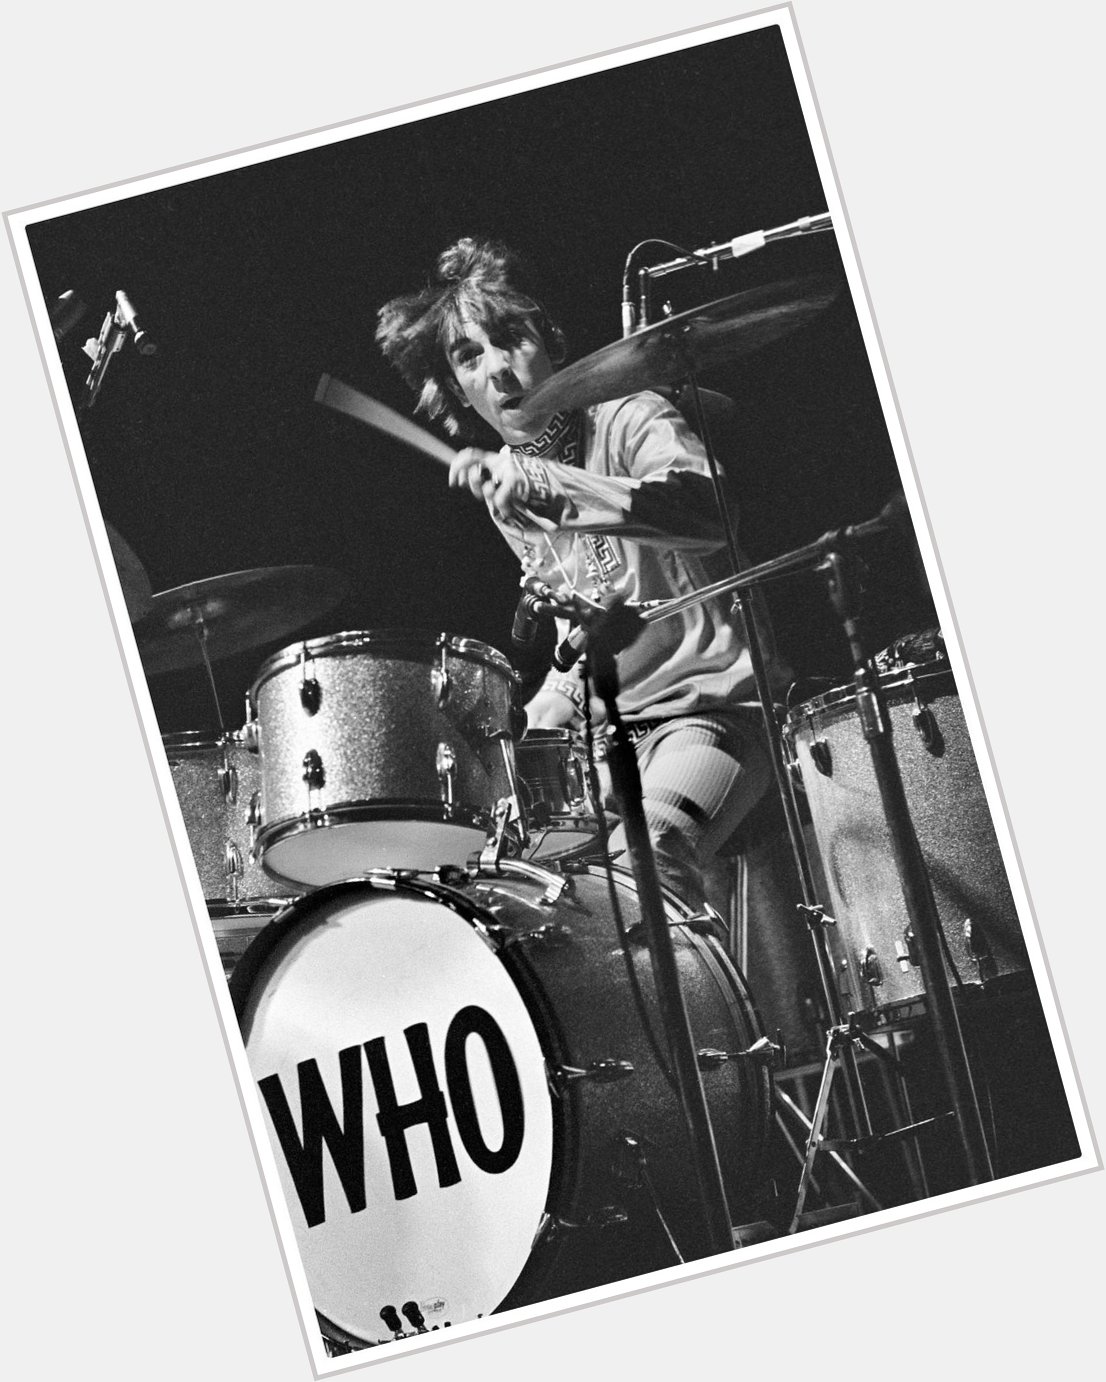 Keith Moon was born on this day in 1946.

Happy Birthday \"Moon the Loon\" ( 